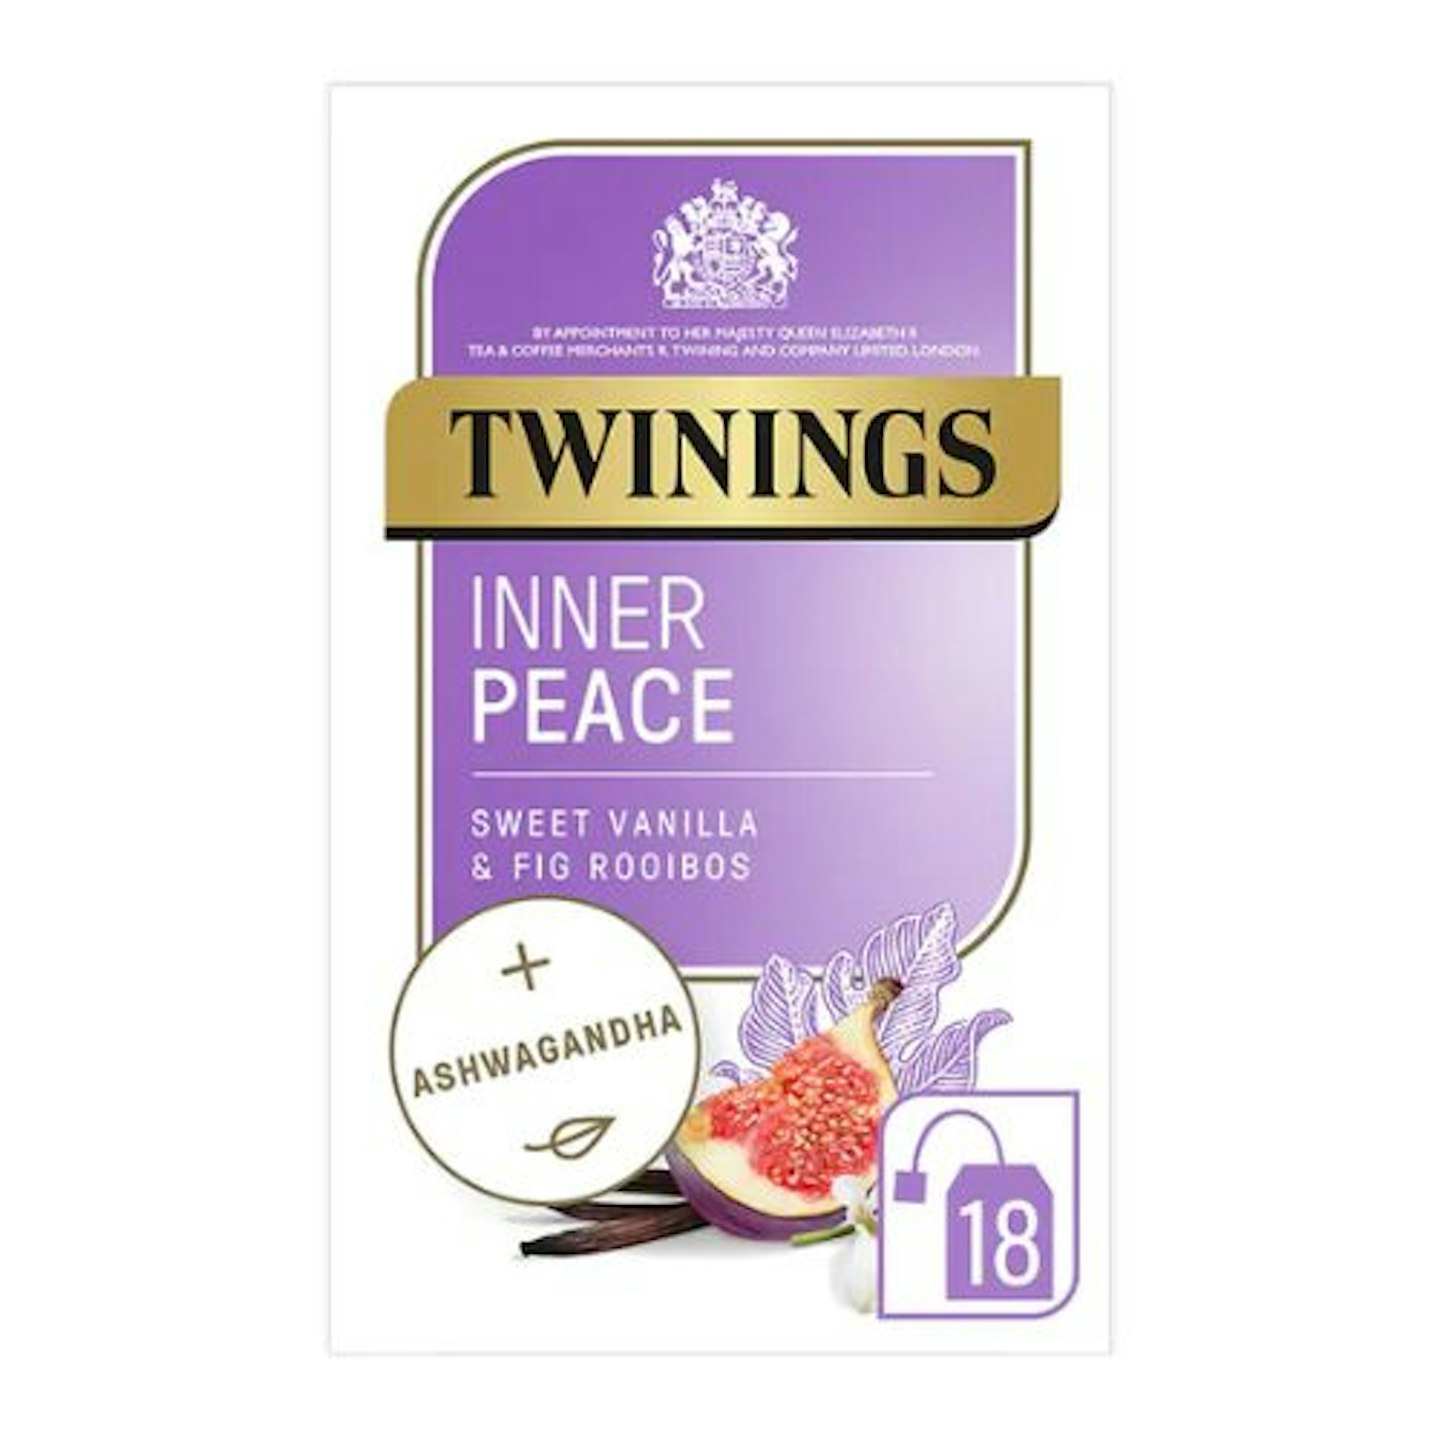 Twinings Adaptogens Inner Peace (with Ashwagandha), 18 Bag